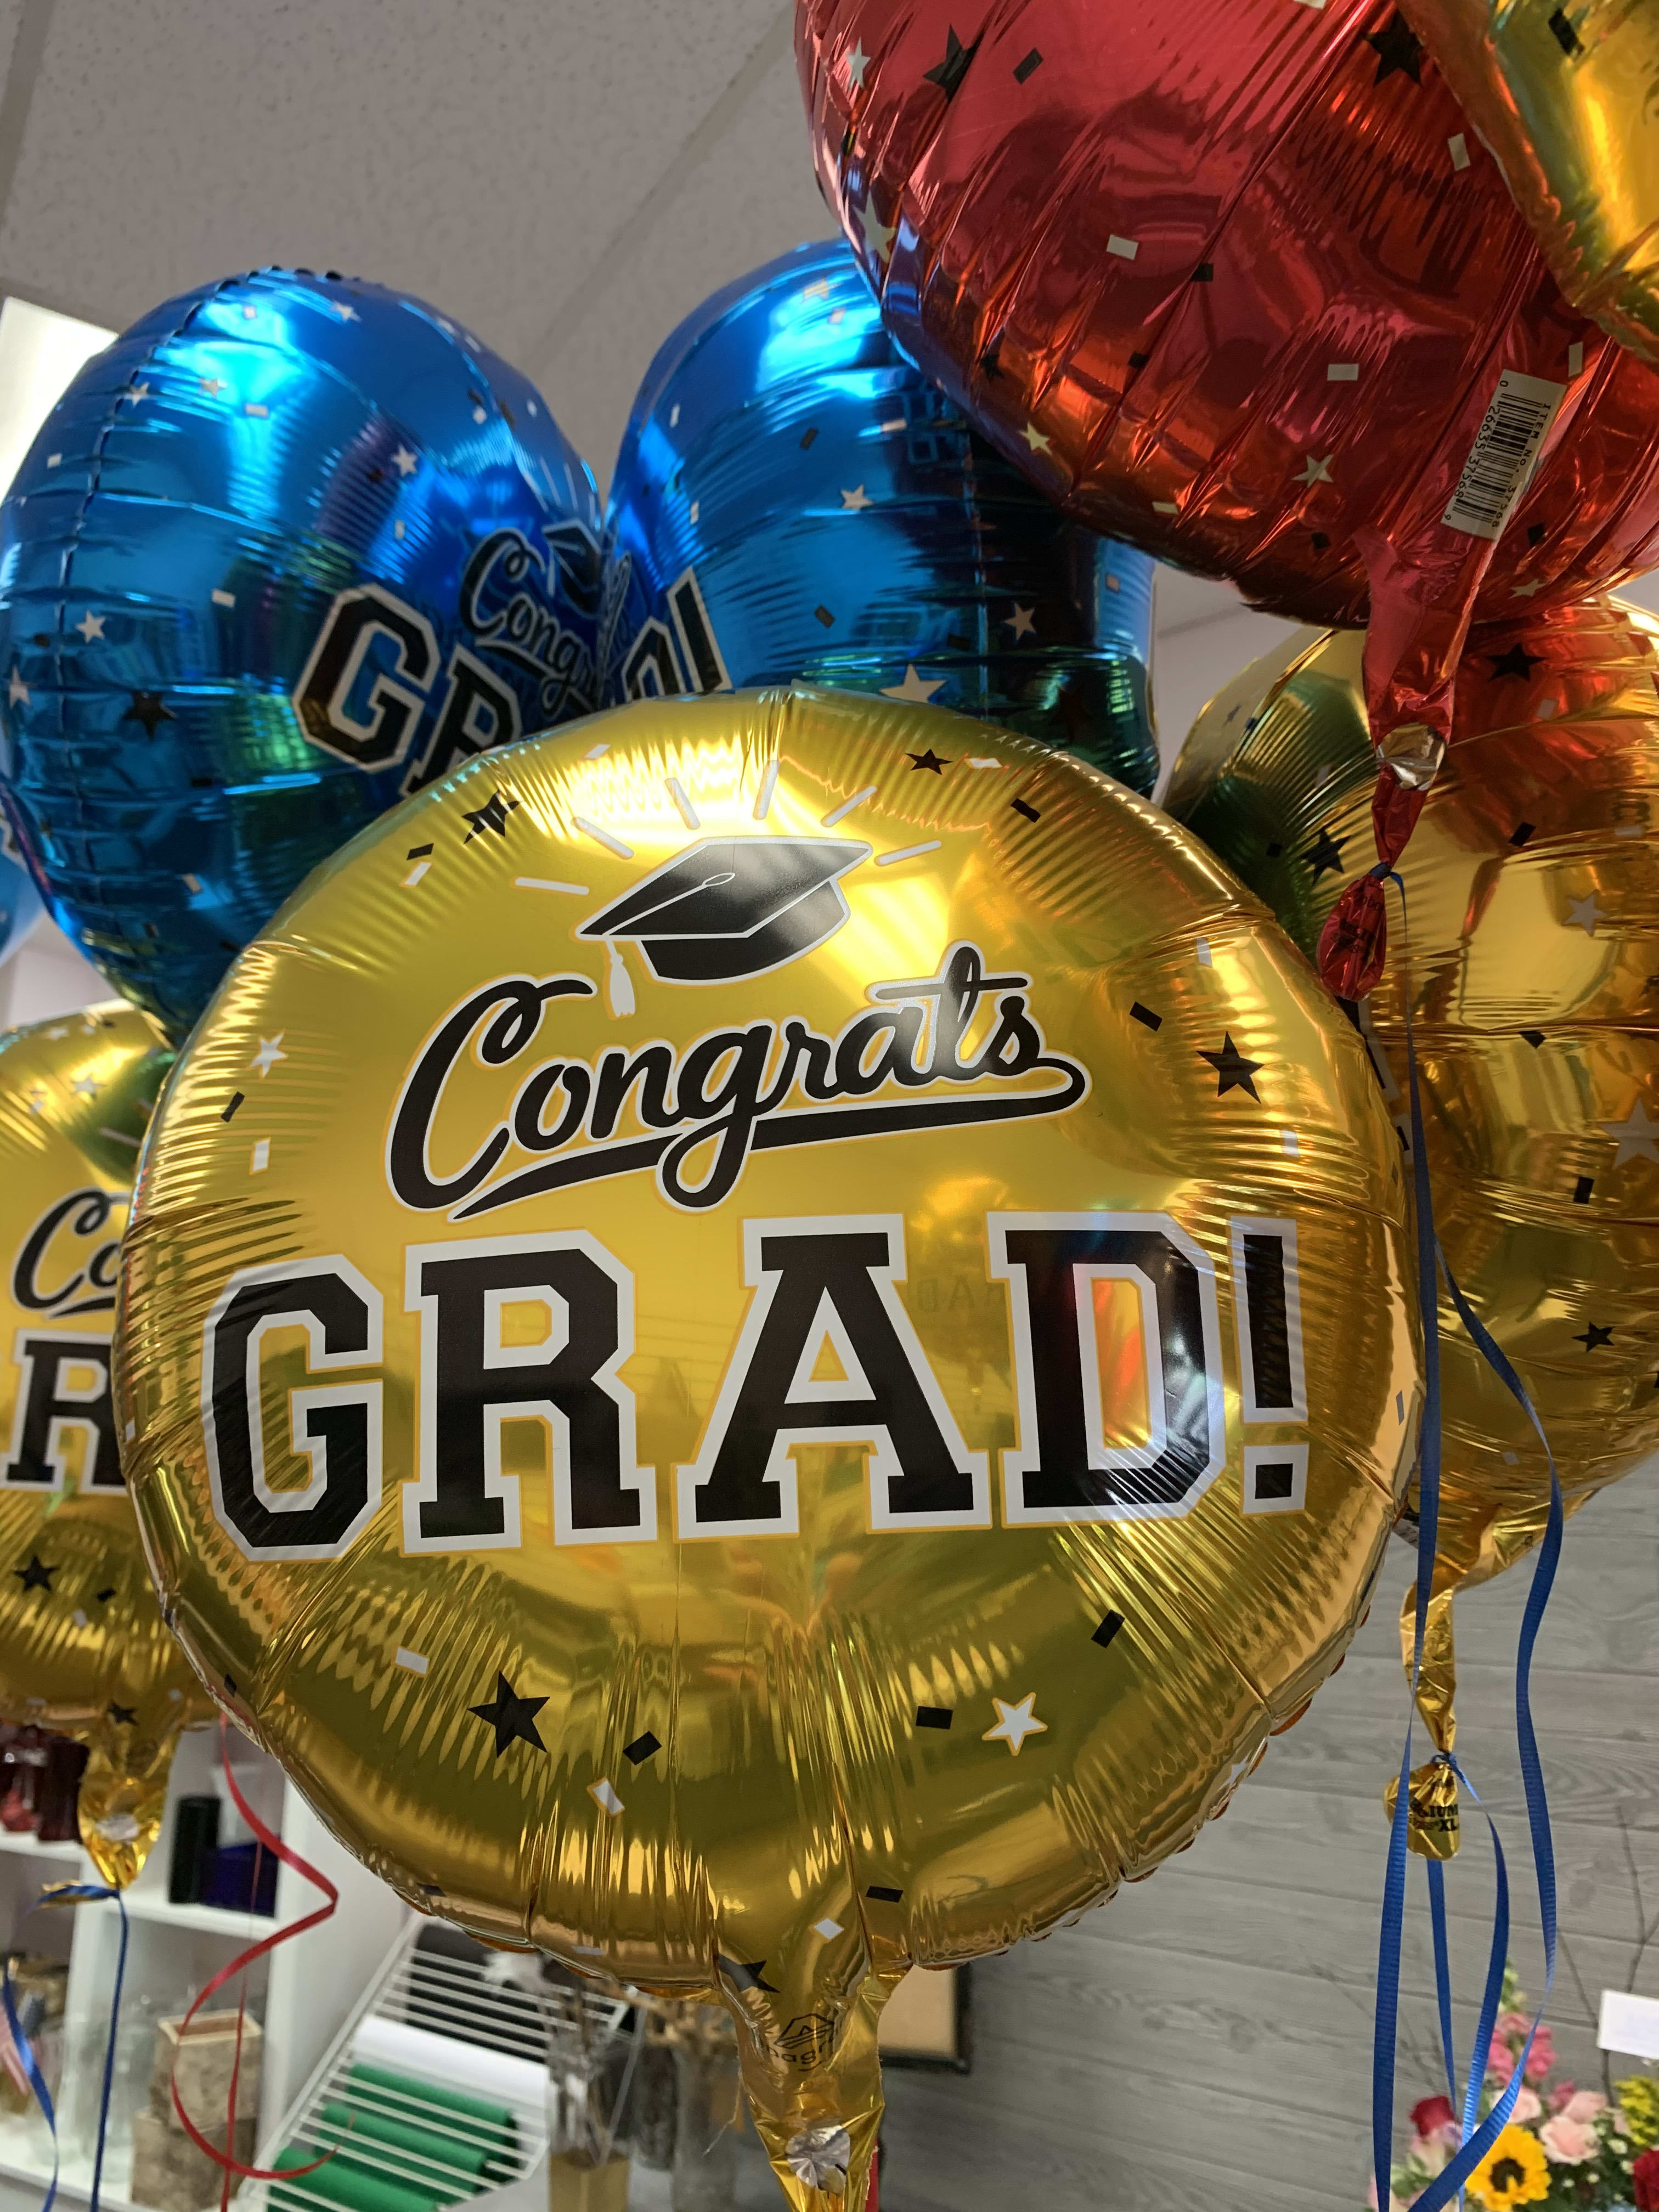 Graduation Mylar Balloons - What can be more festive than balloons? Add a balloon or a bouquet of balloons to your graduation party or gift. It will liven the party for sure!